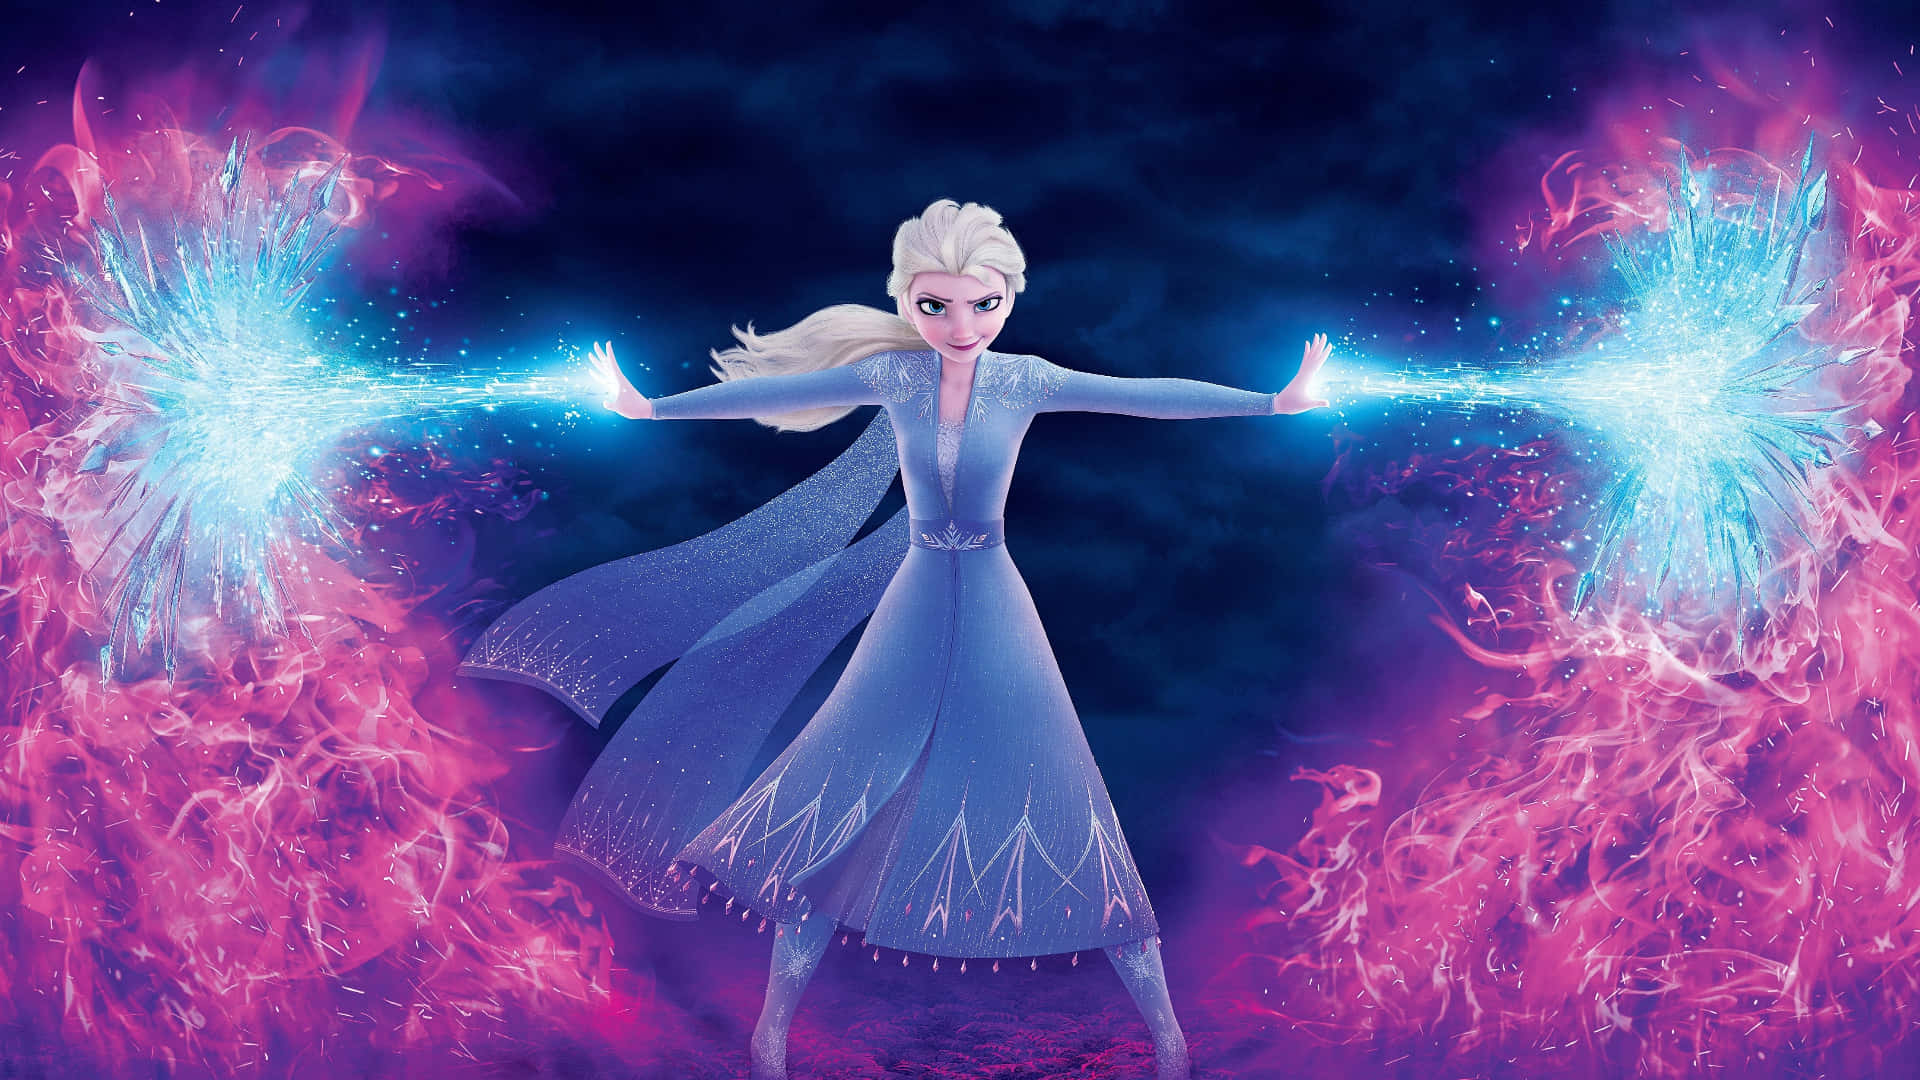 Join Elsa, Anna, Kristoff and Olaf for Fun and Adventure in Frozen